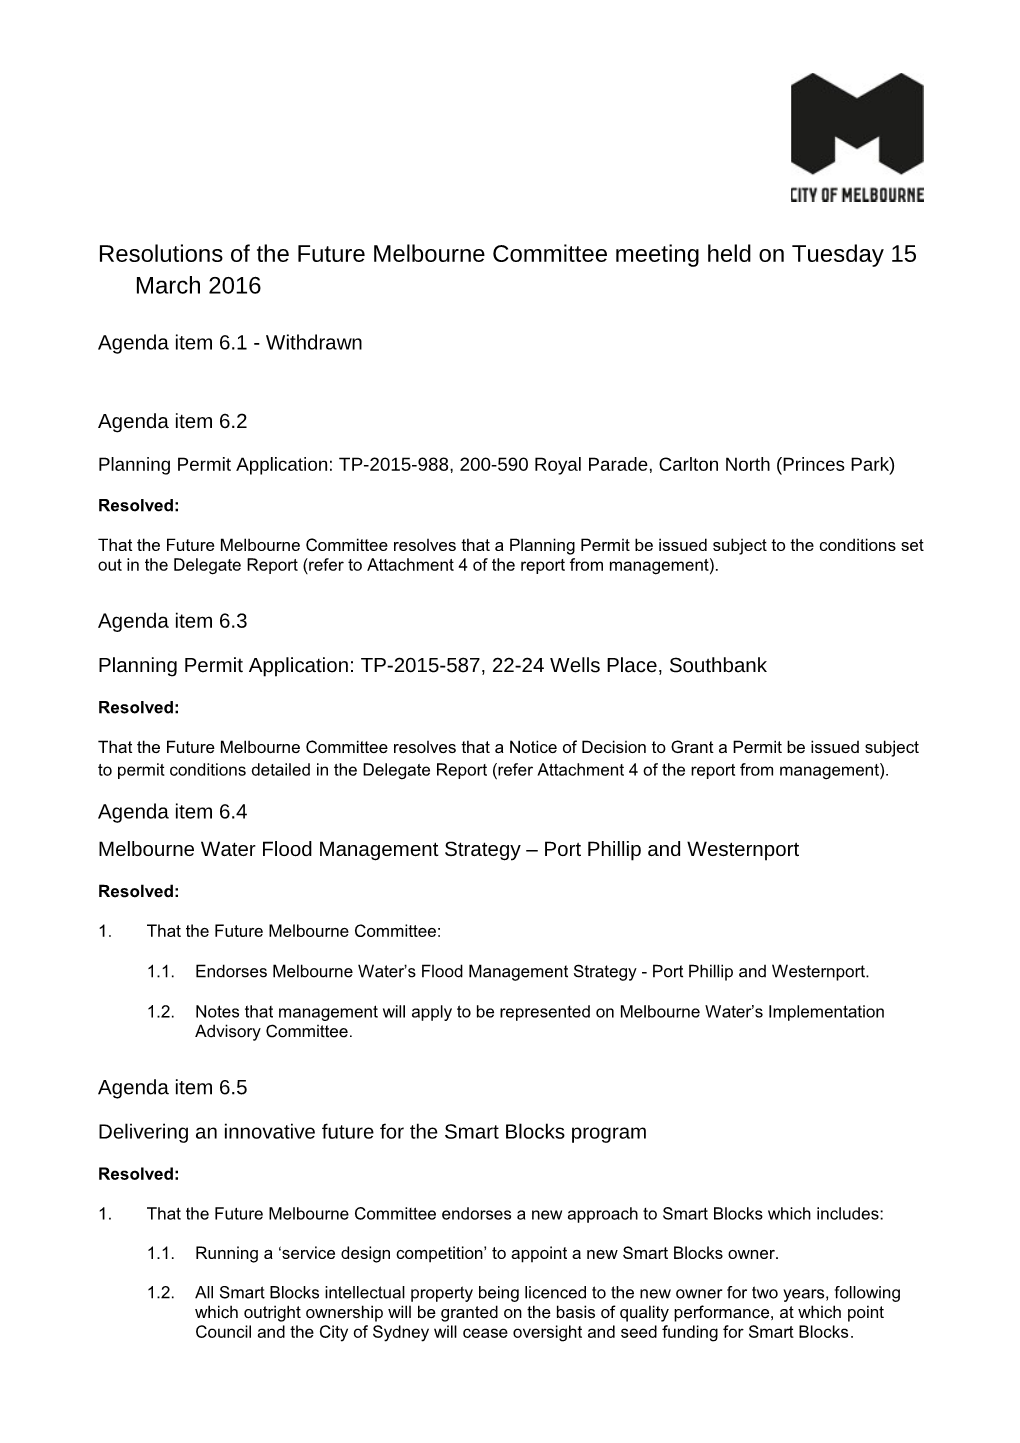 Resolutions of the Future Melbourne Committee Meeting Held on Tuesday 15 March 2016